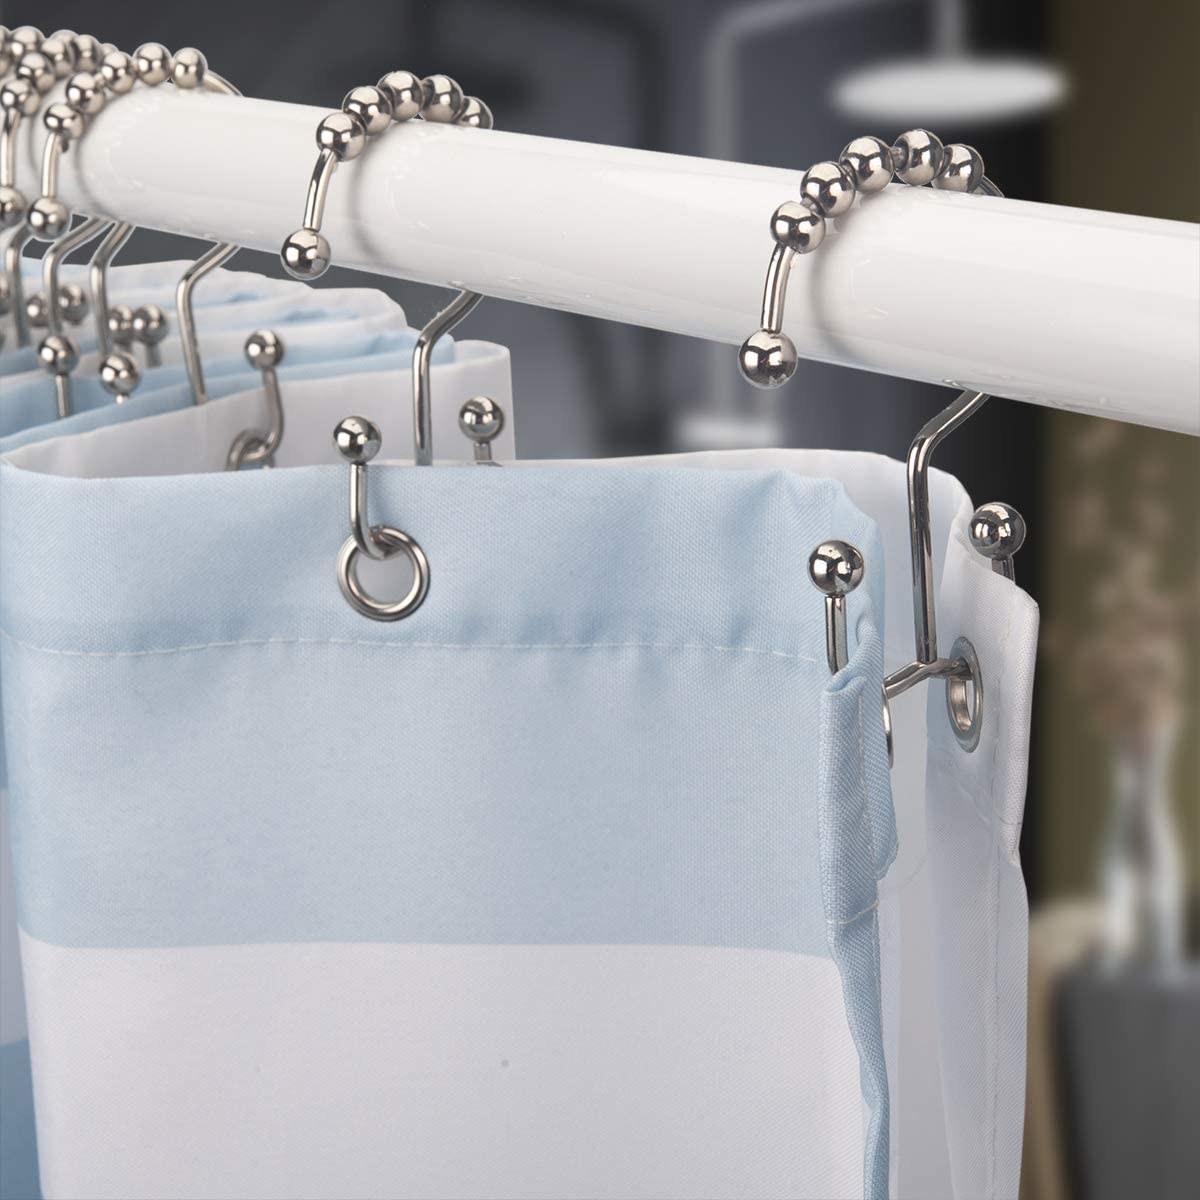 A shower curtain and liner on separate hooks on a curtain rod